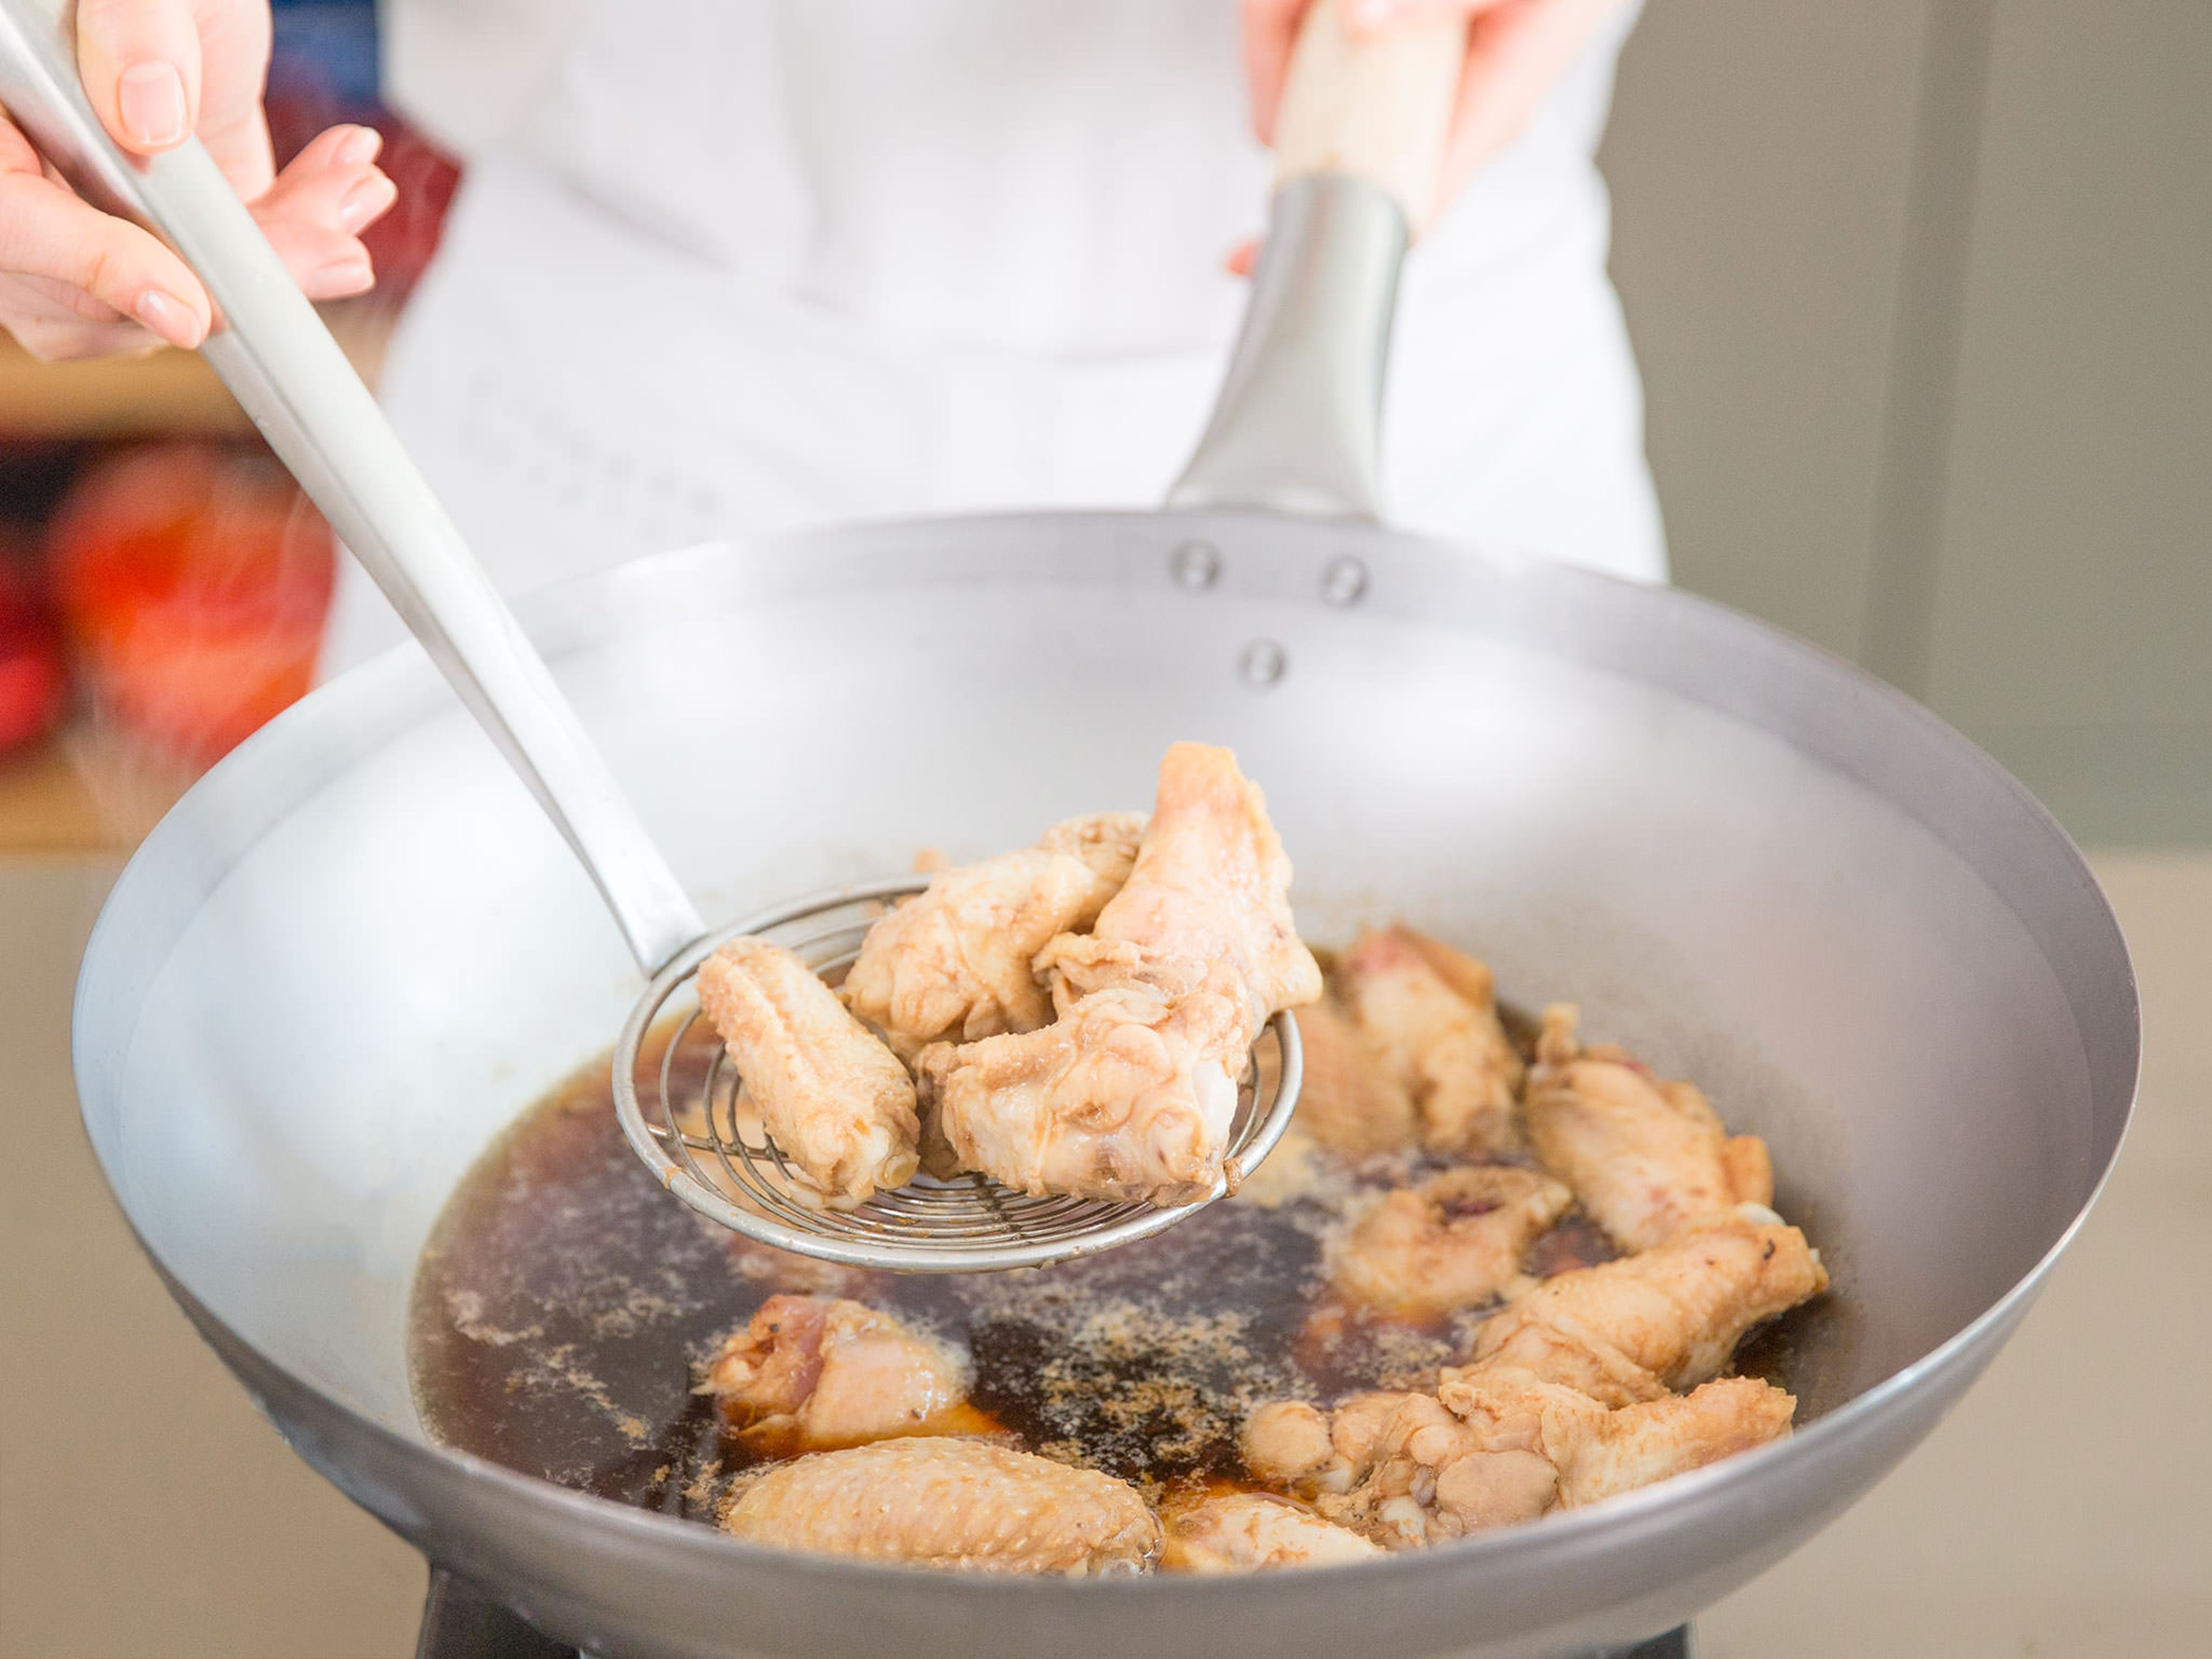 Fill wok a third of the way full with water and bring to a boil. Add chicken wings, blanch for approx. 3 – 5 min., and then remove from wok. Discard water.